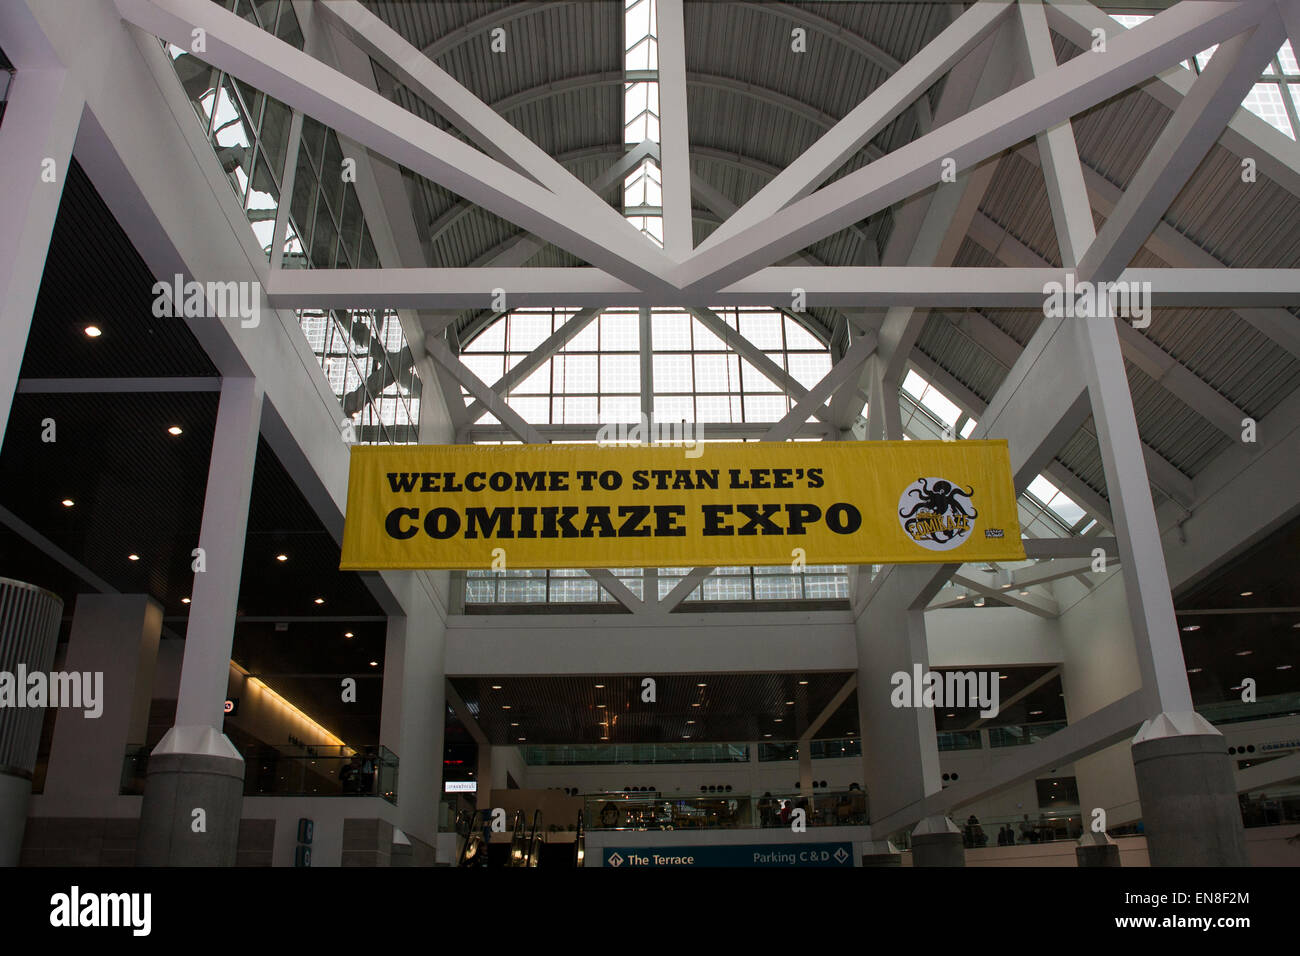 The sign in the hall welcomes patrons and guests to Stan Lee's Comikaze Expo at the Convention Center in downtown Los Angeles. Stock Photo